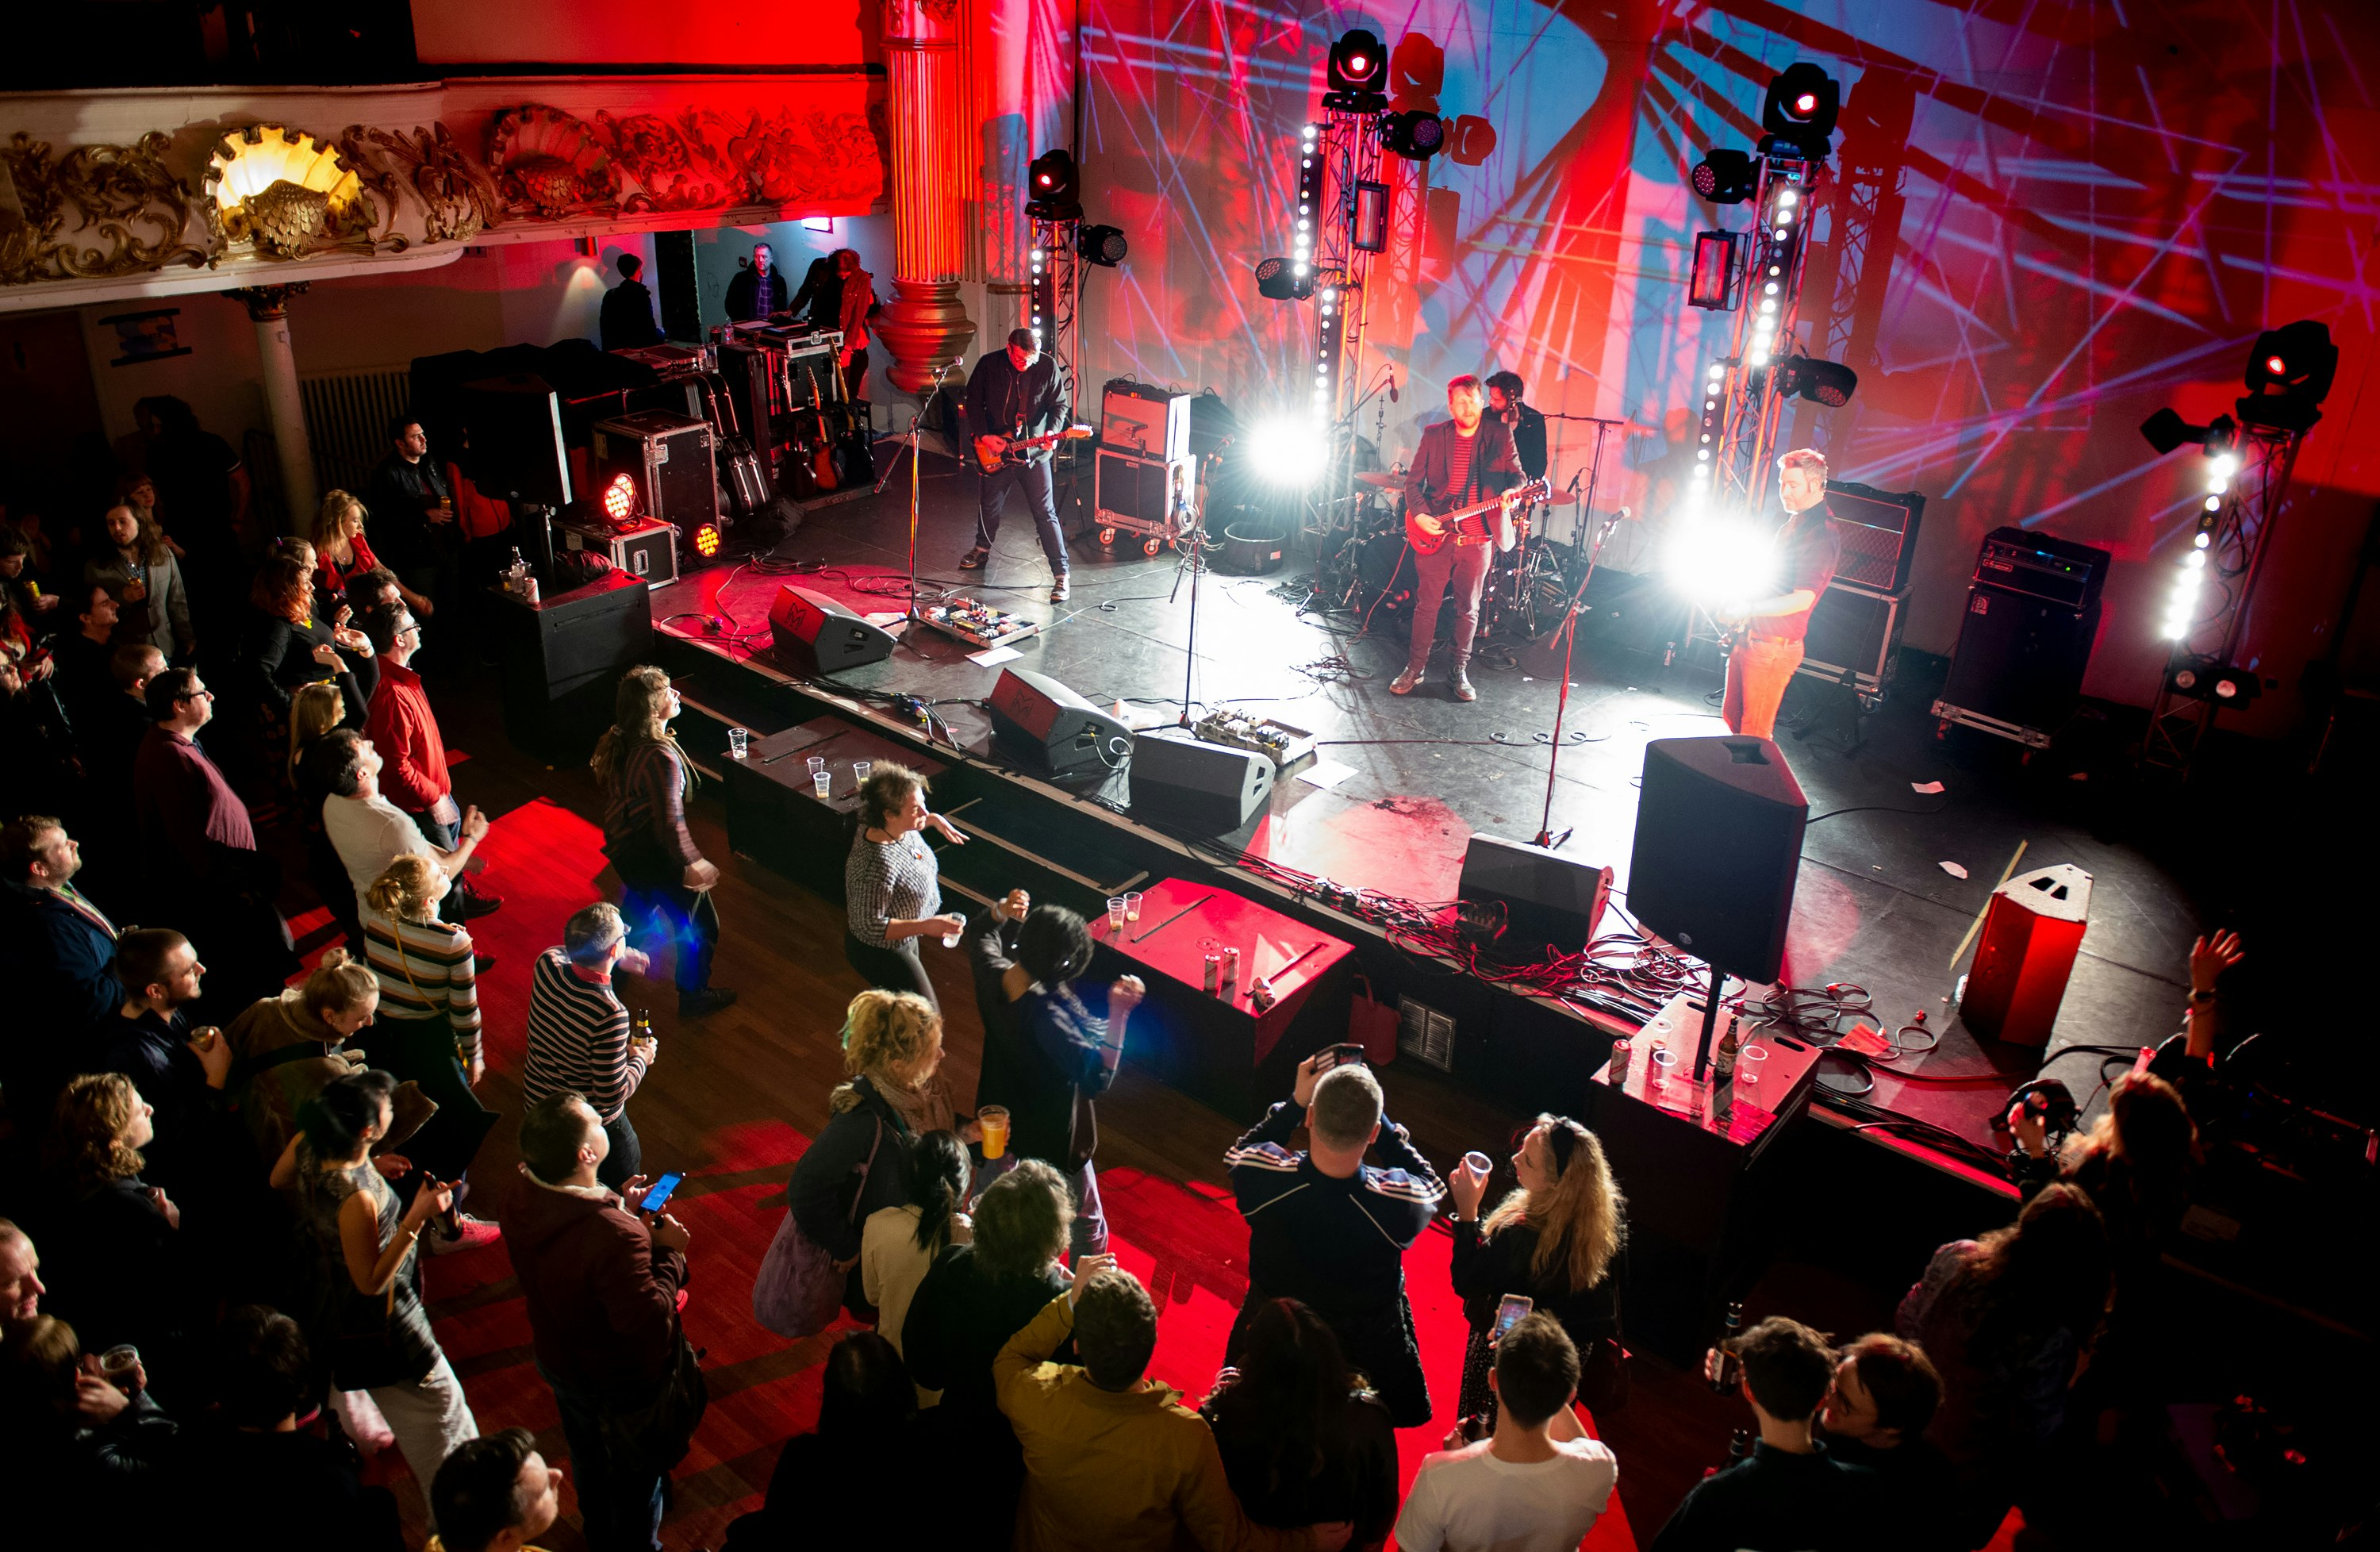 A three-piece band rock band play to a crowd at an intimate indoor concert. The band are in the spotlight while the crowd are in shadow.